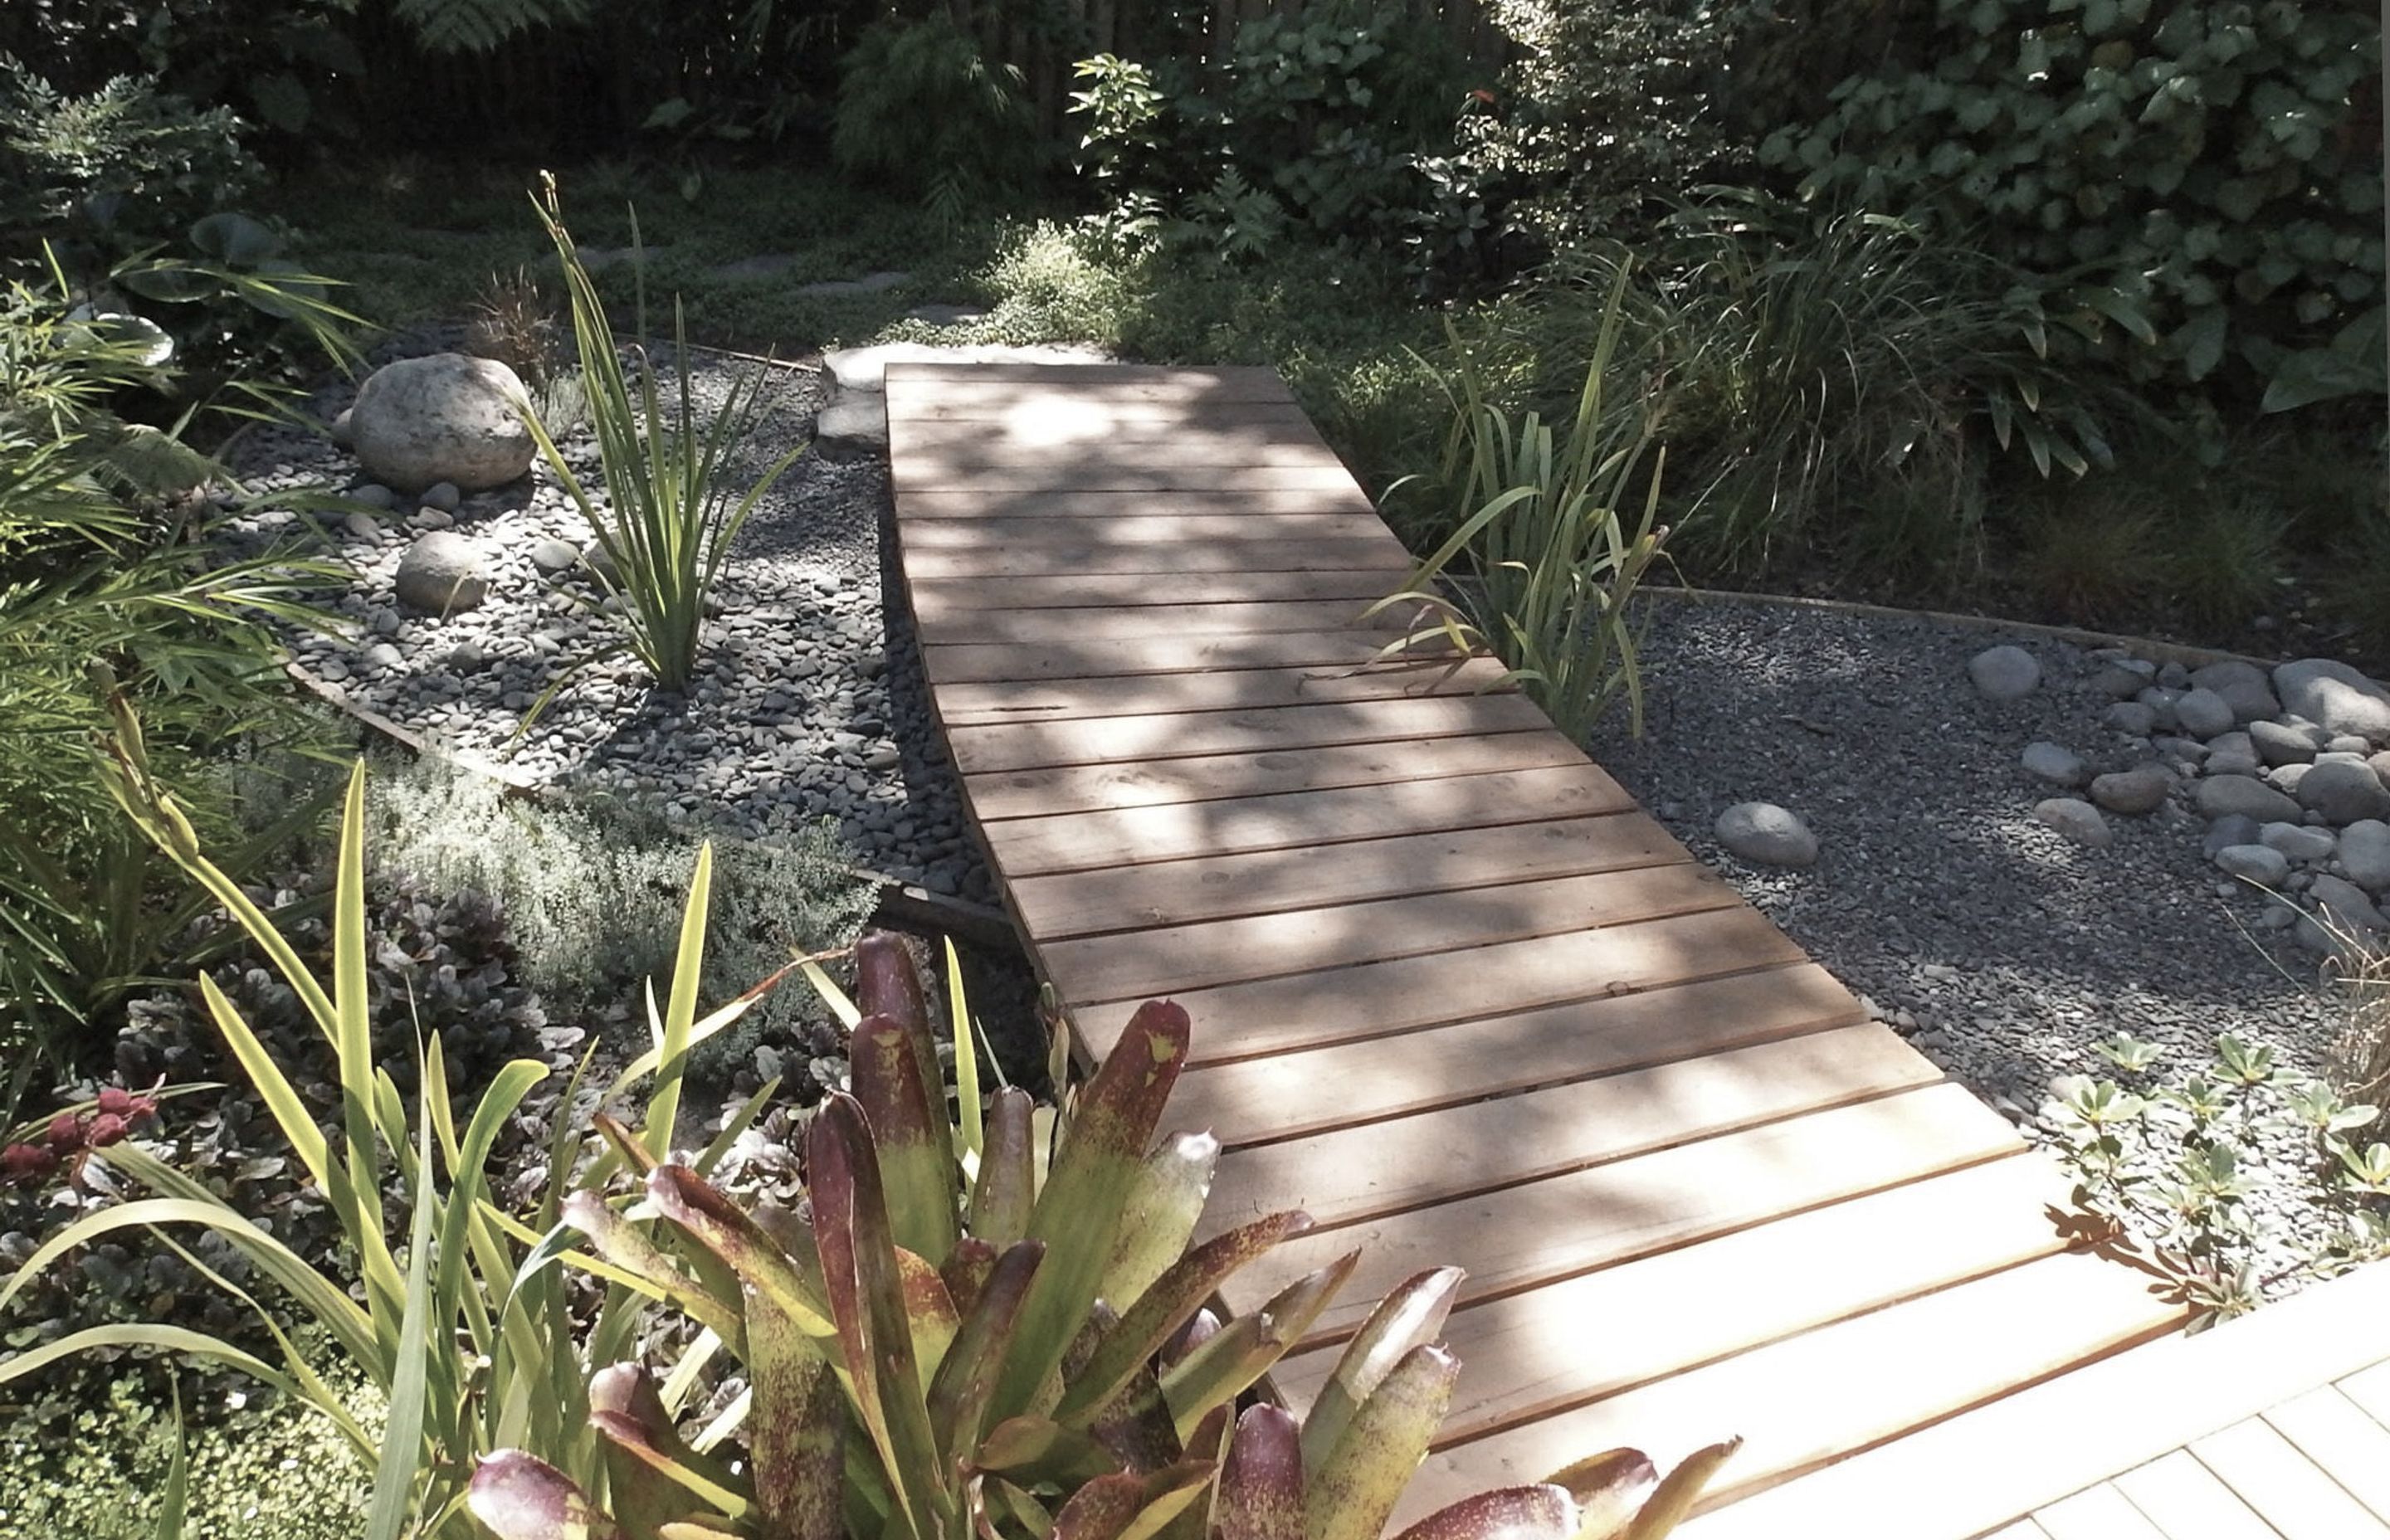 A boardwalk over the rain garden attended by lush planting